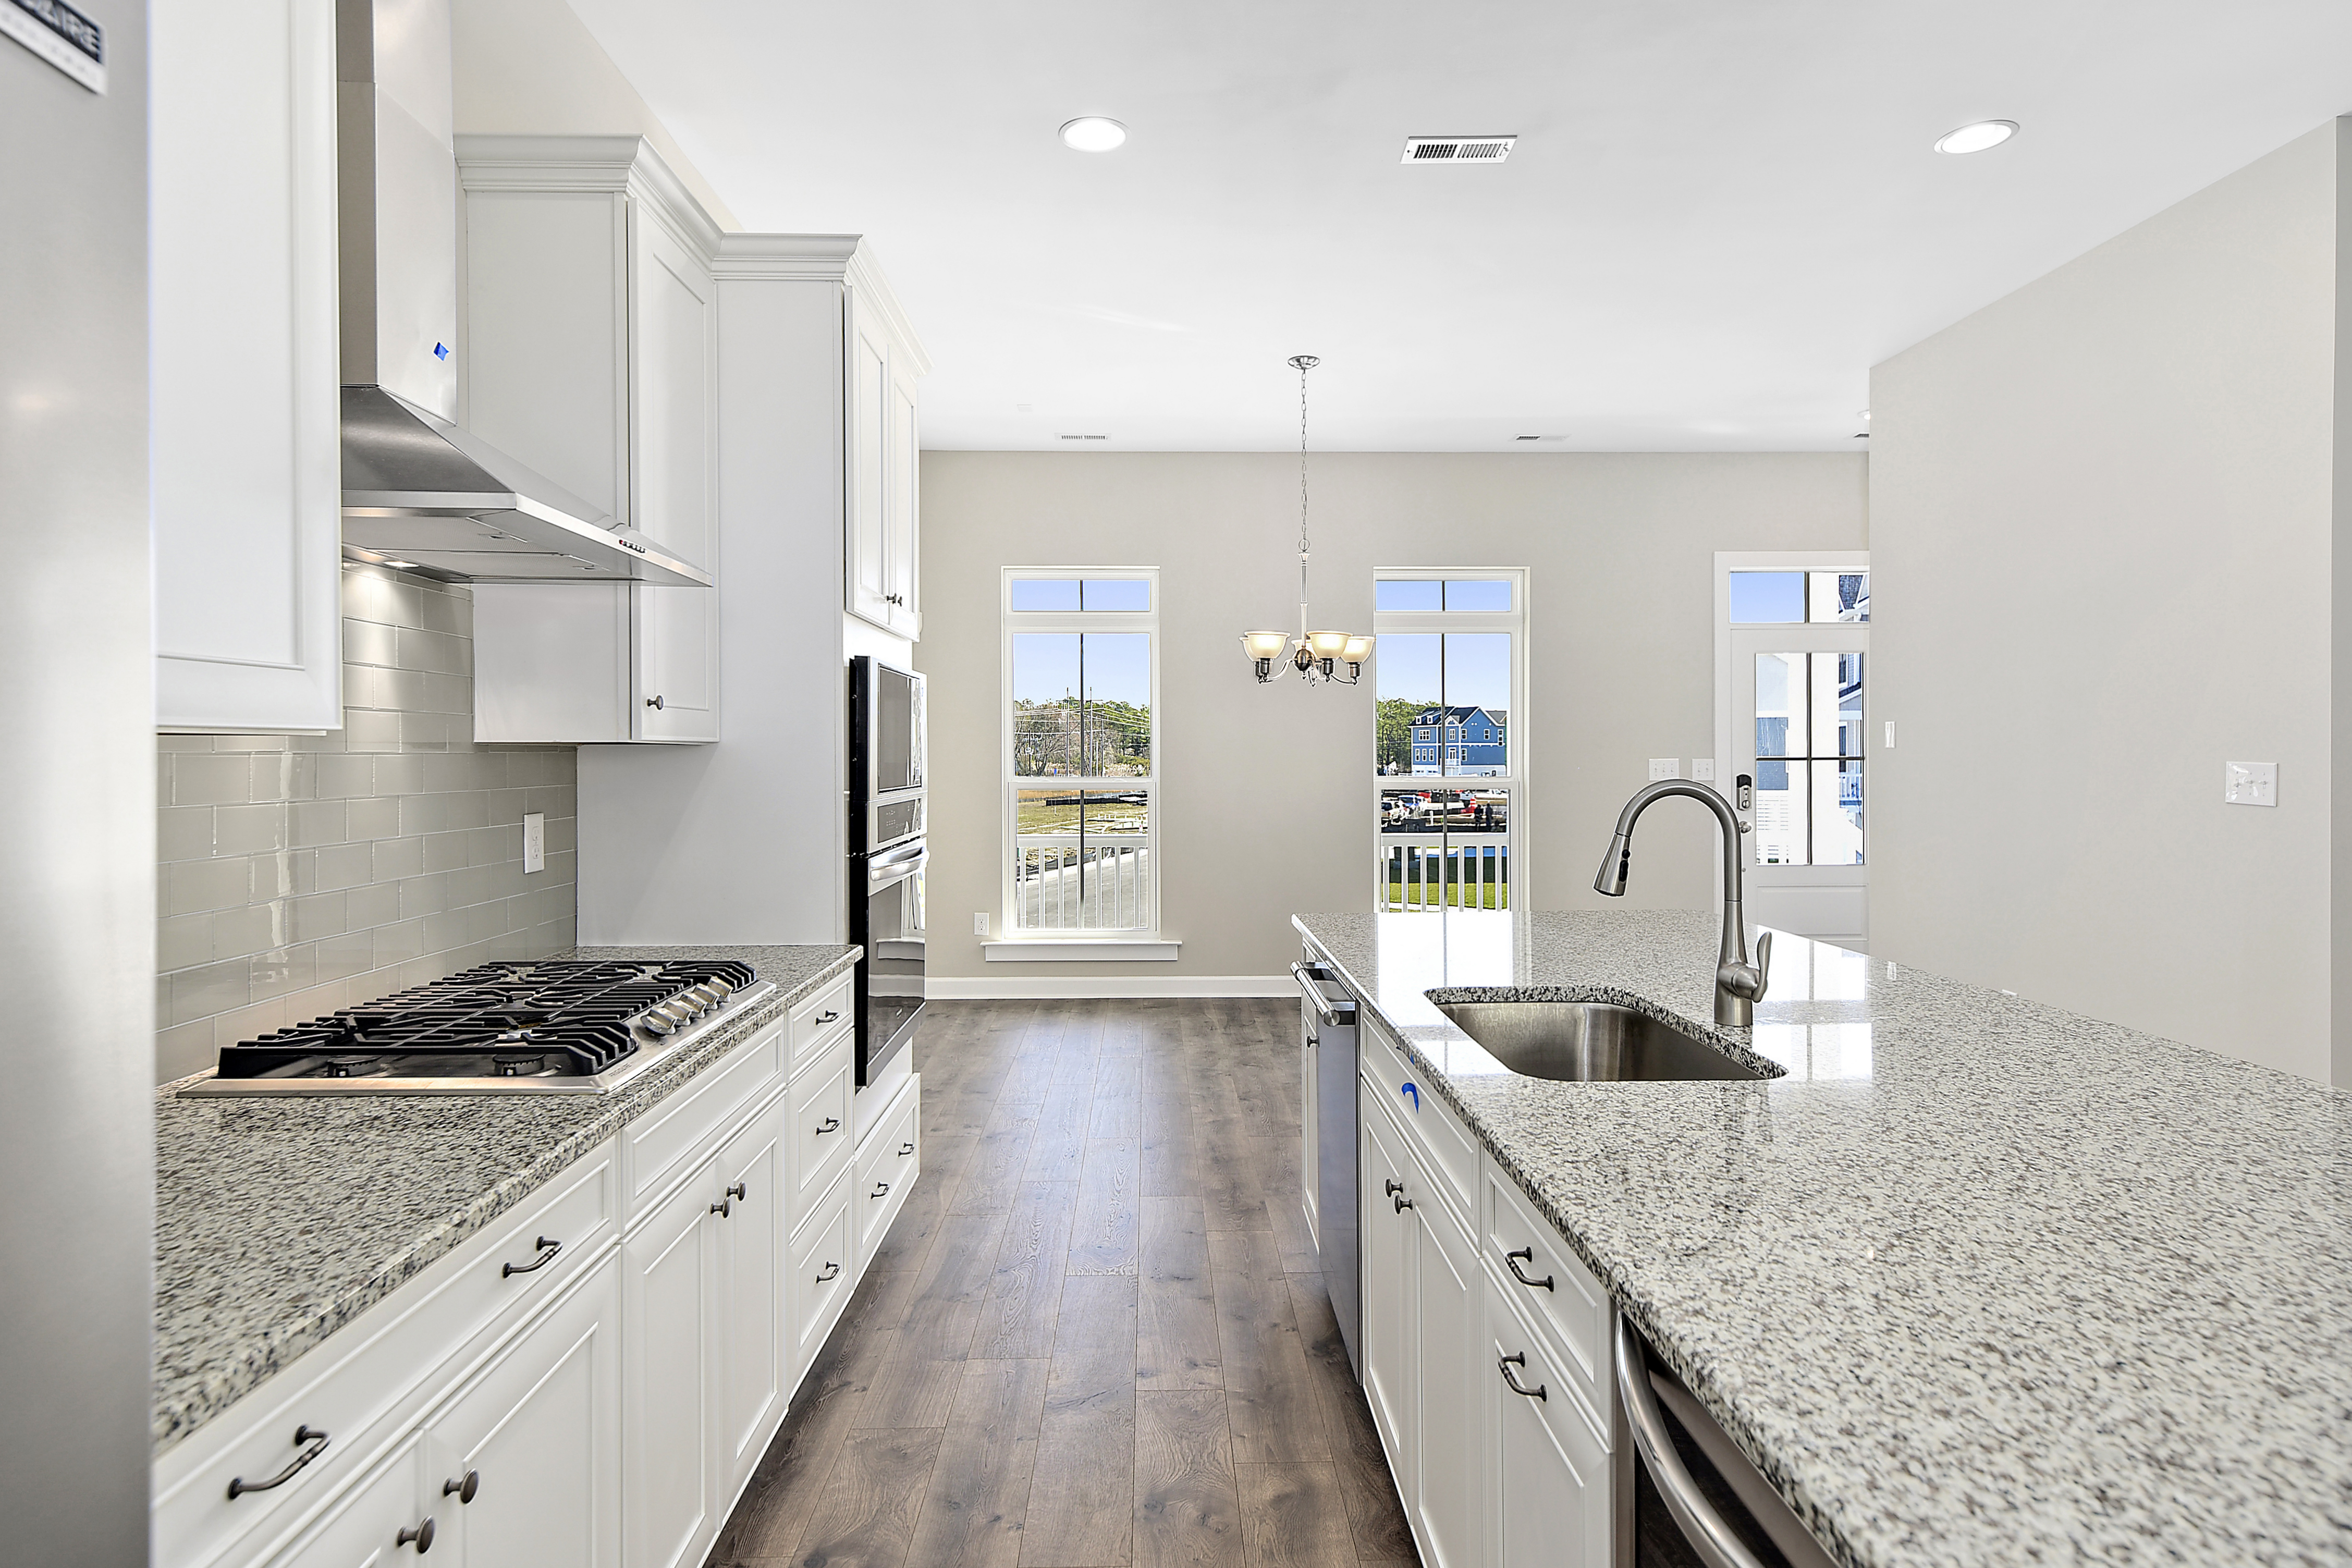 Kitchen sink, stove top, granite countertops and large center island in the chef's kitchen